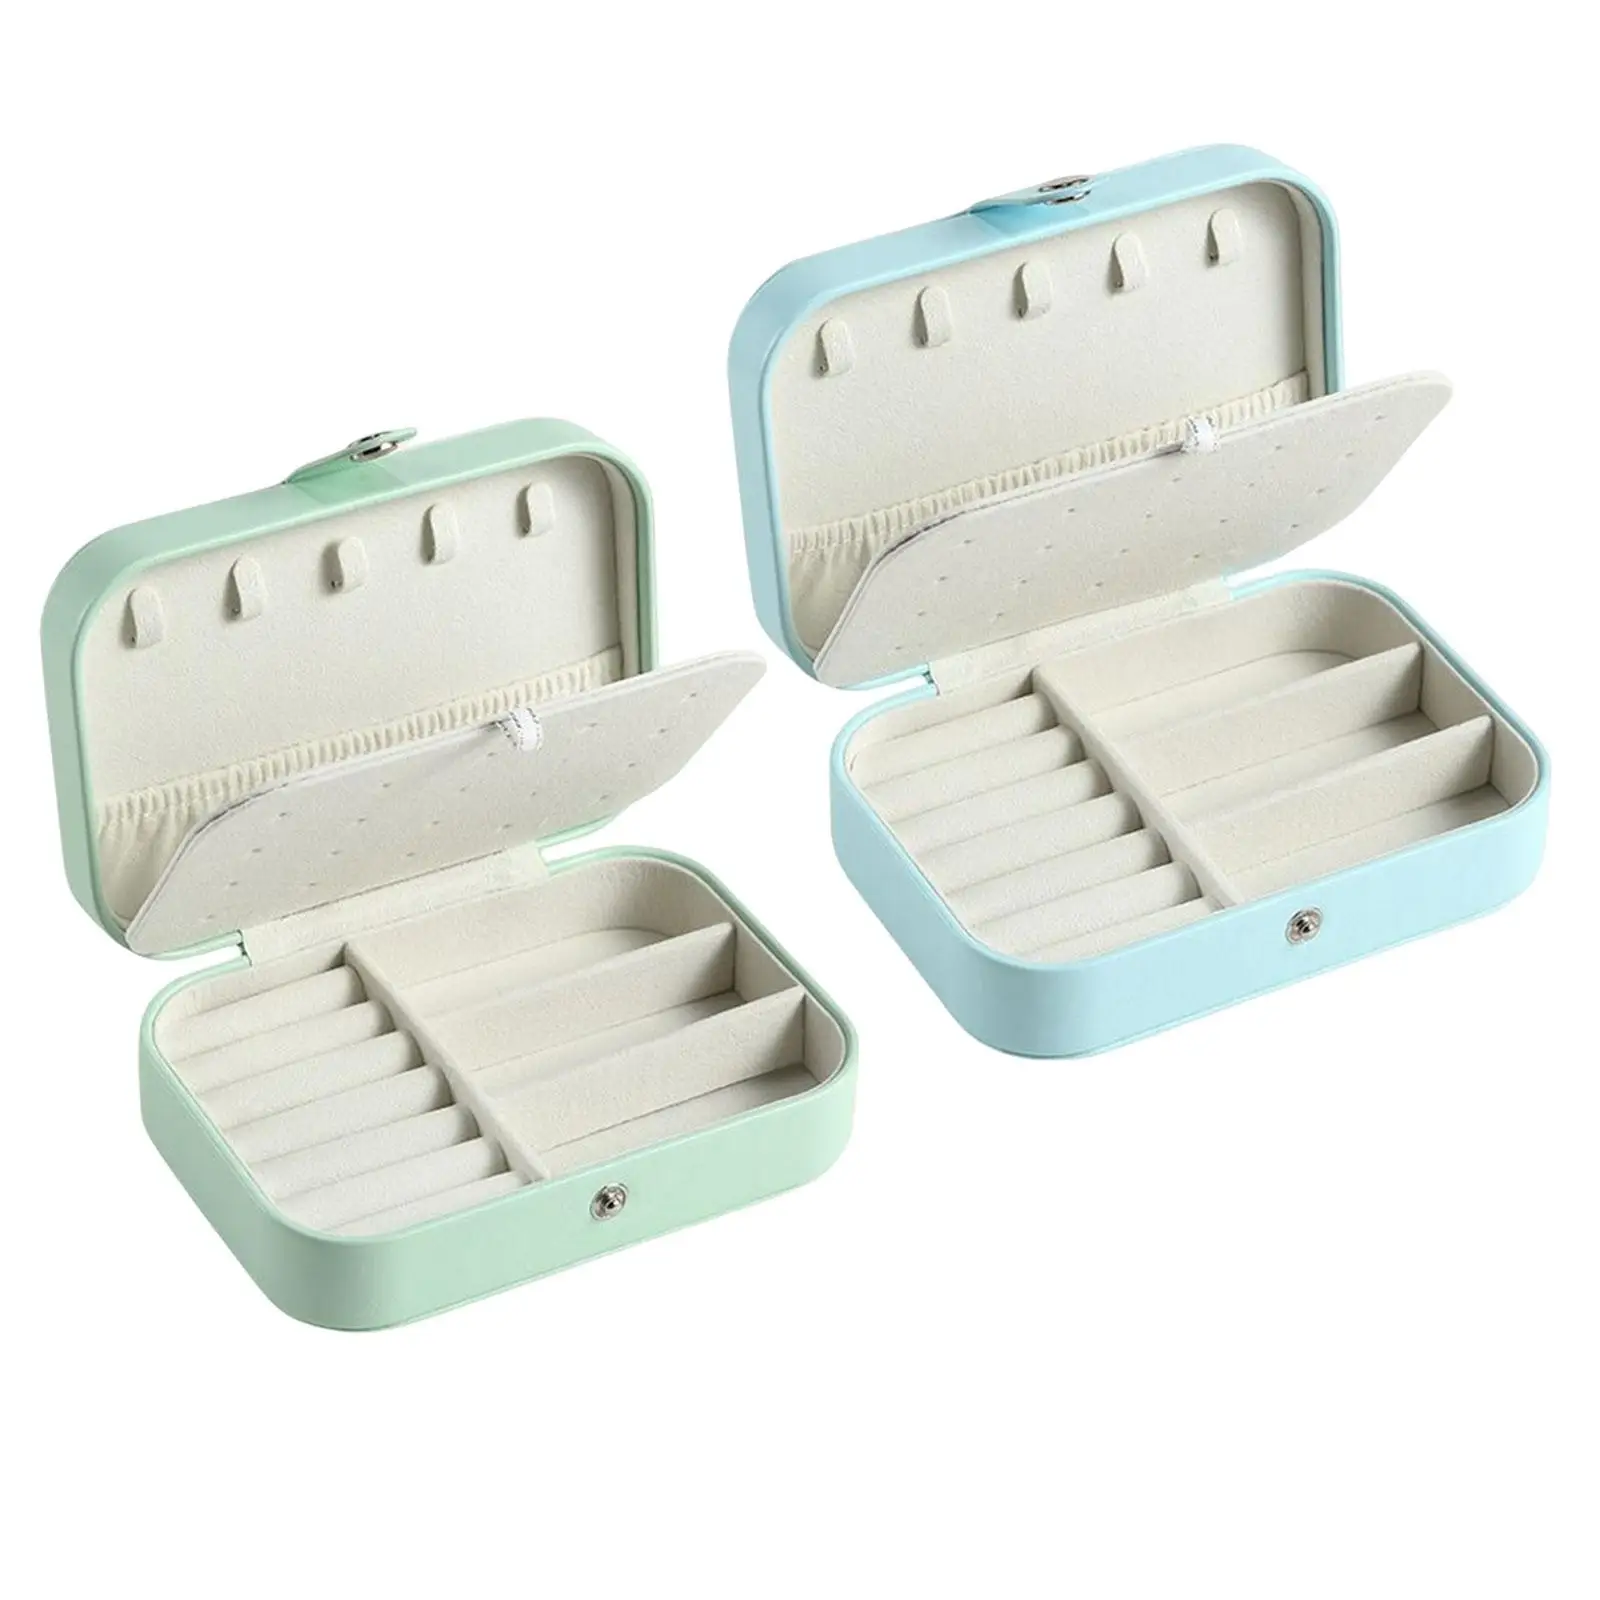 Small Travel Jewelry Box Gift Double Layer Dustproof Storage Case Organizer Holder for Rings Necklaces Ear Studs Bracelets Girls